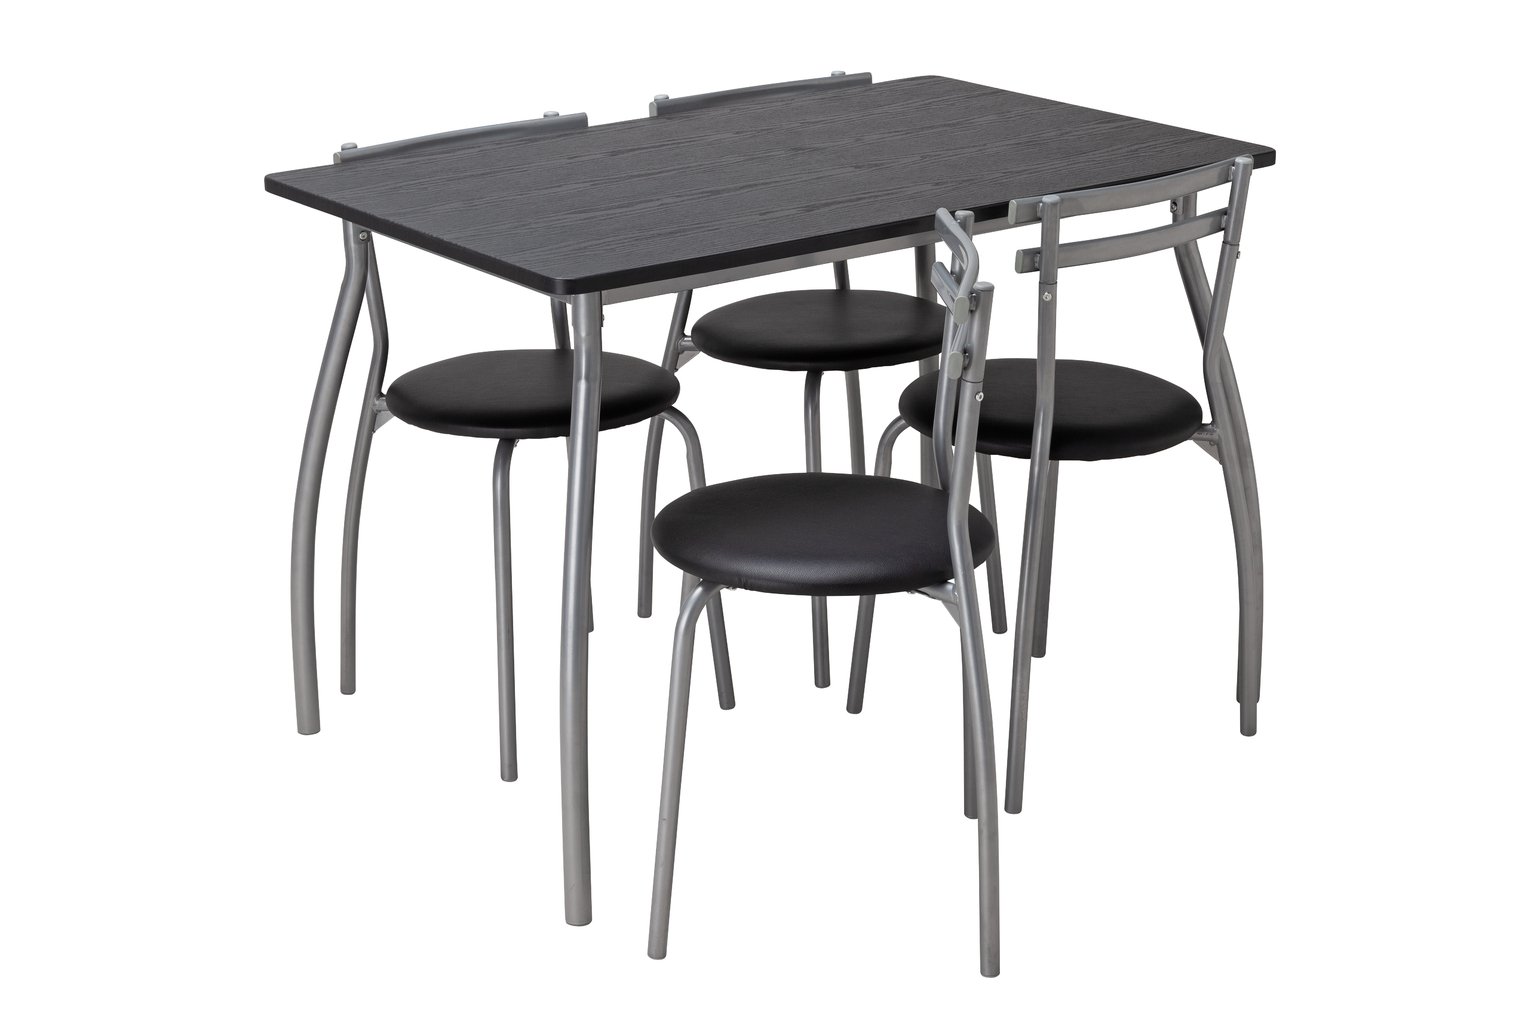 Argos Home Leon Black Dining Table & 4 Black Chairs